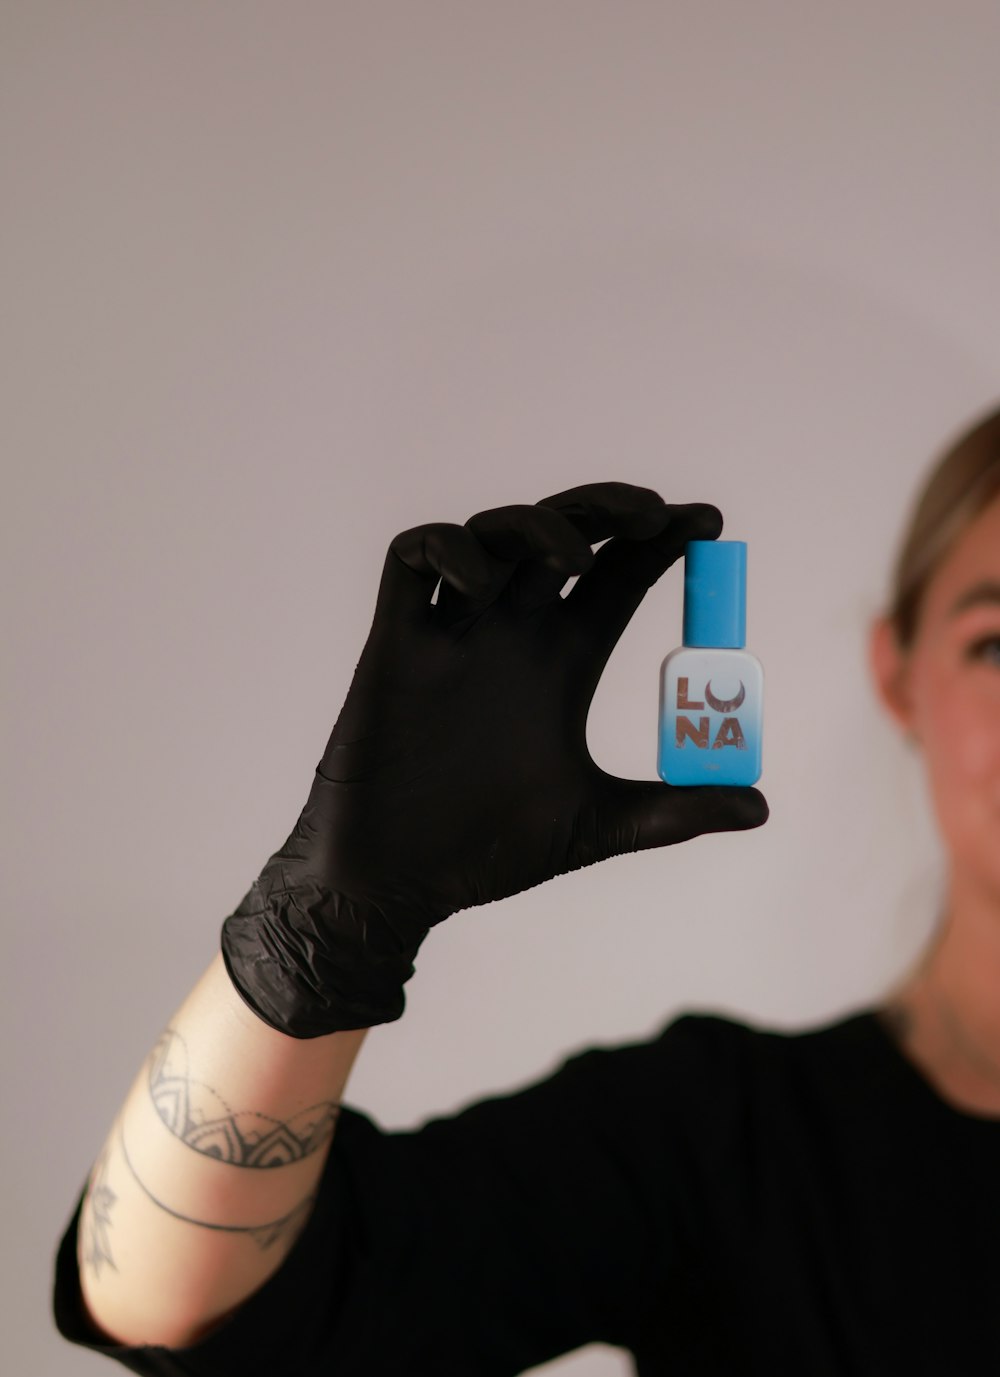 a woman in black shirt holding up a small blue object